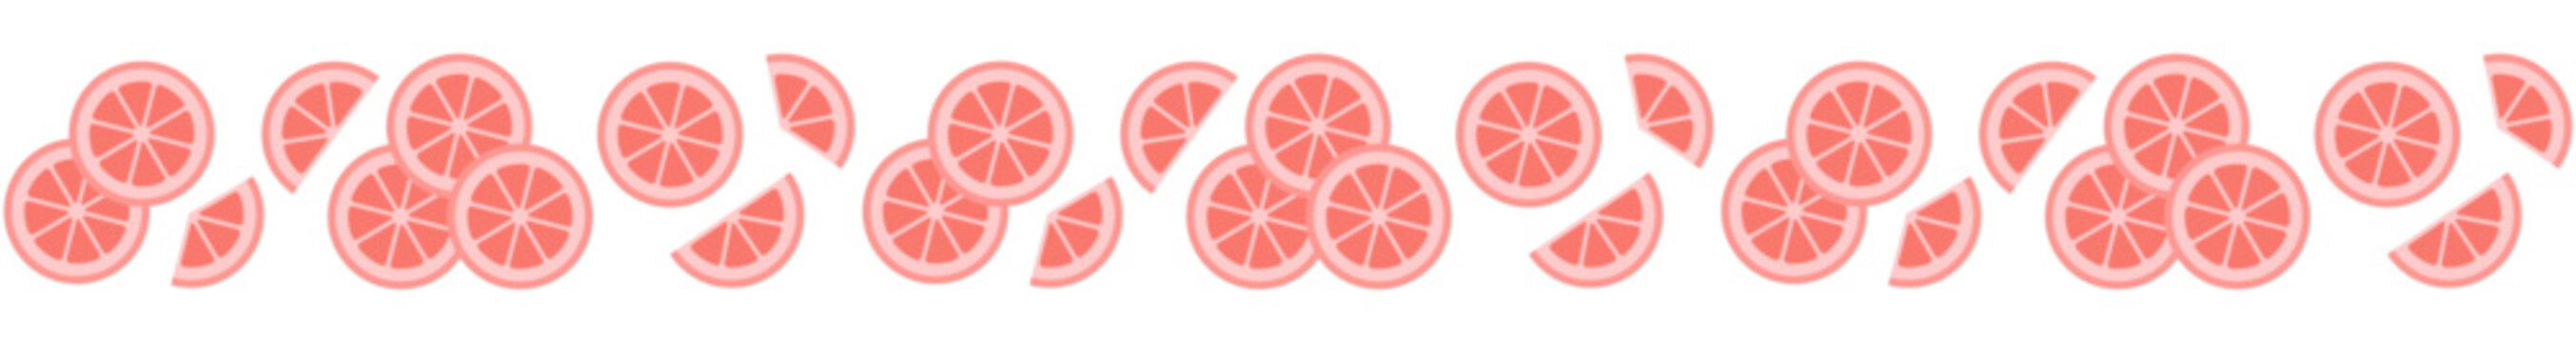 Seamless border with grapefruit slices. Can be used for summer cards, invitations. Isolated vector and PNG illustration on transparent background.